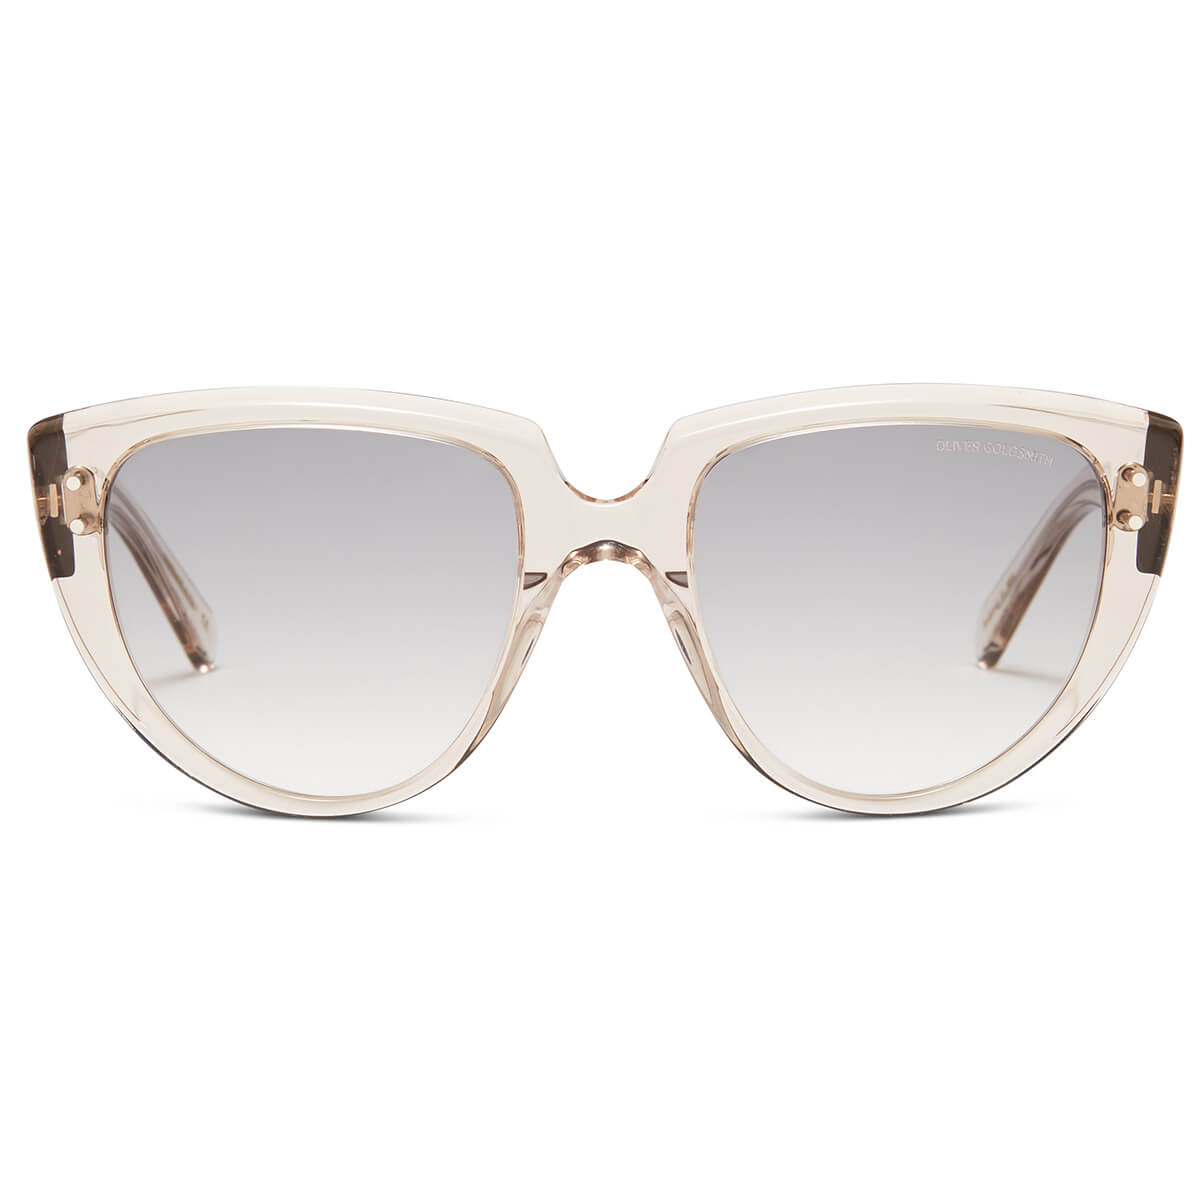 Y-Not WS Sunglasses with Sugar acetate frame